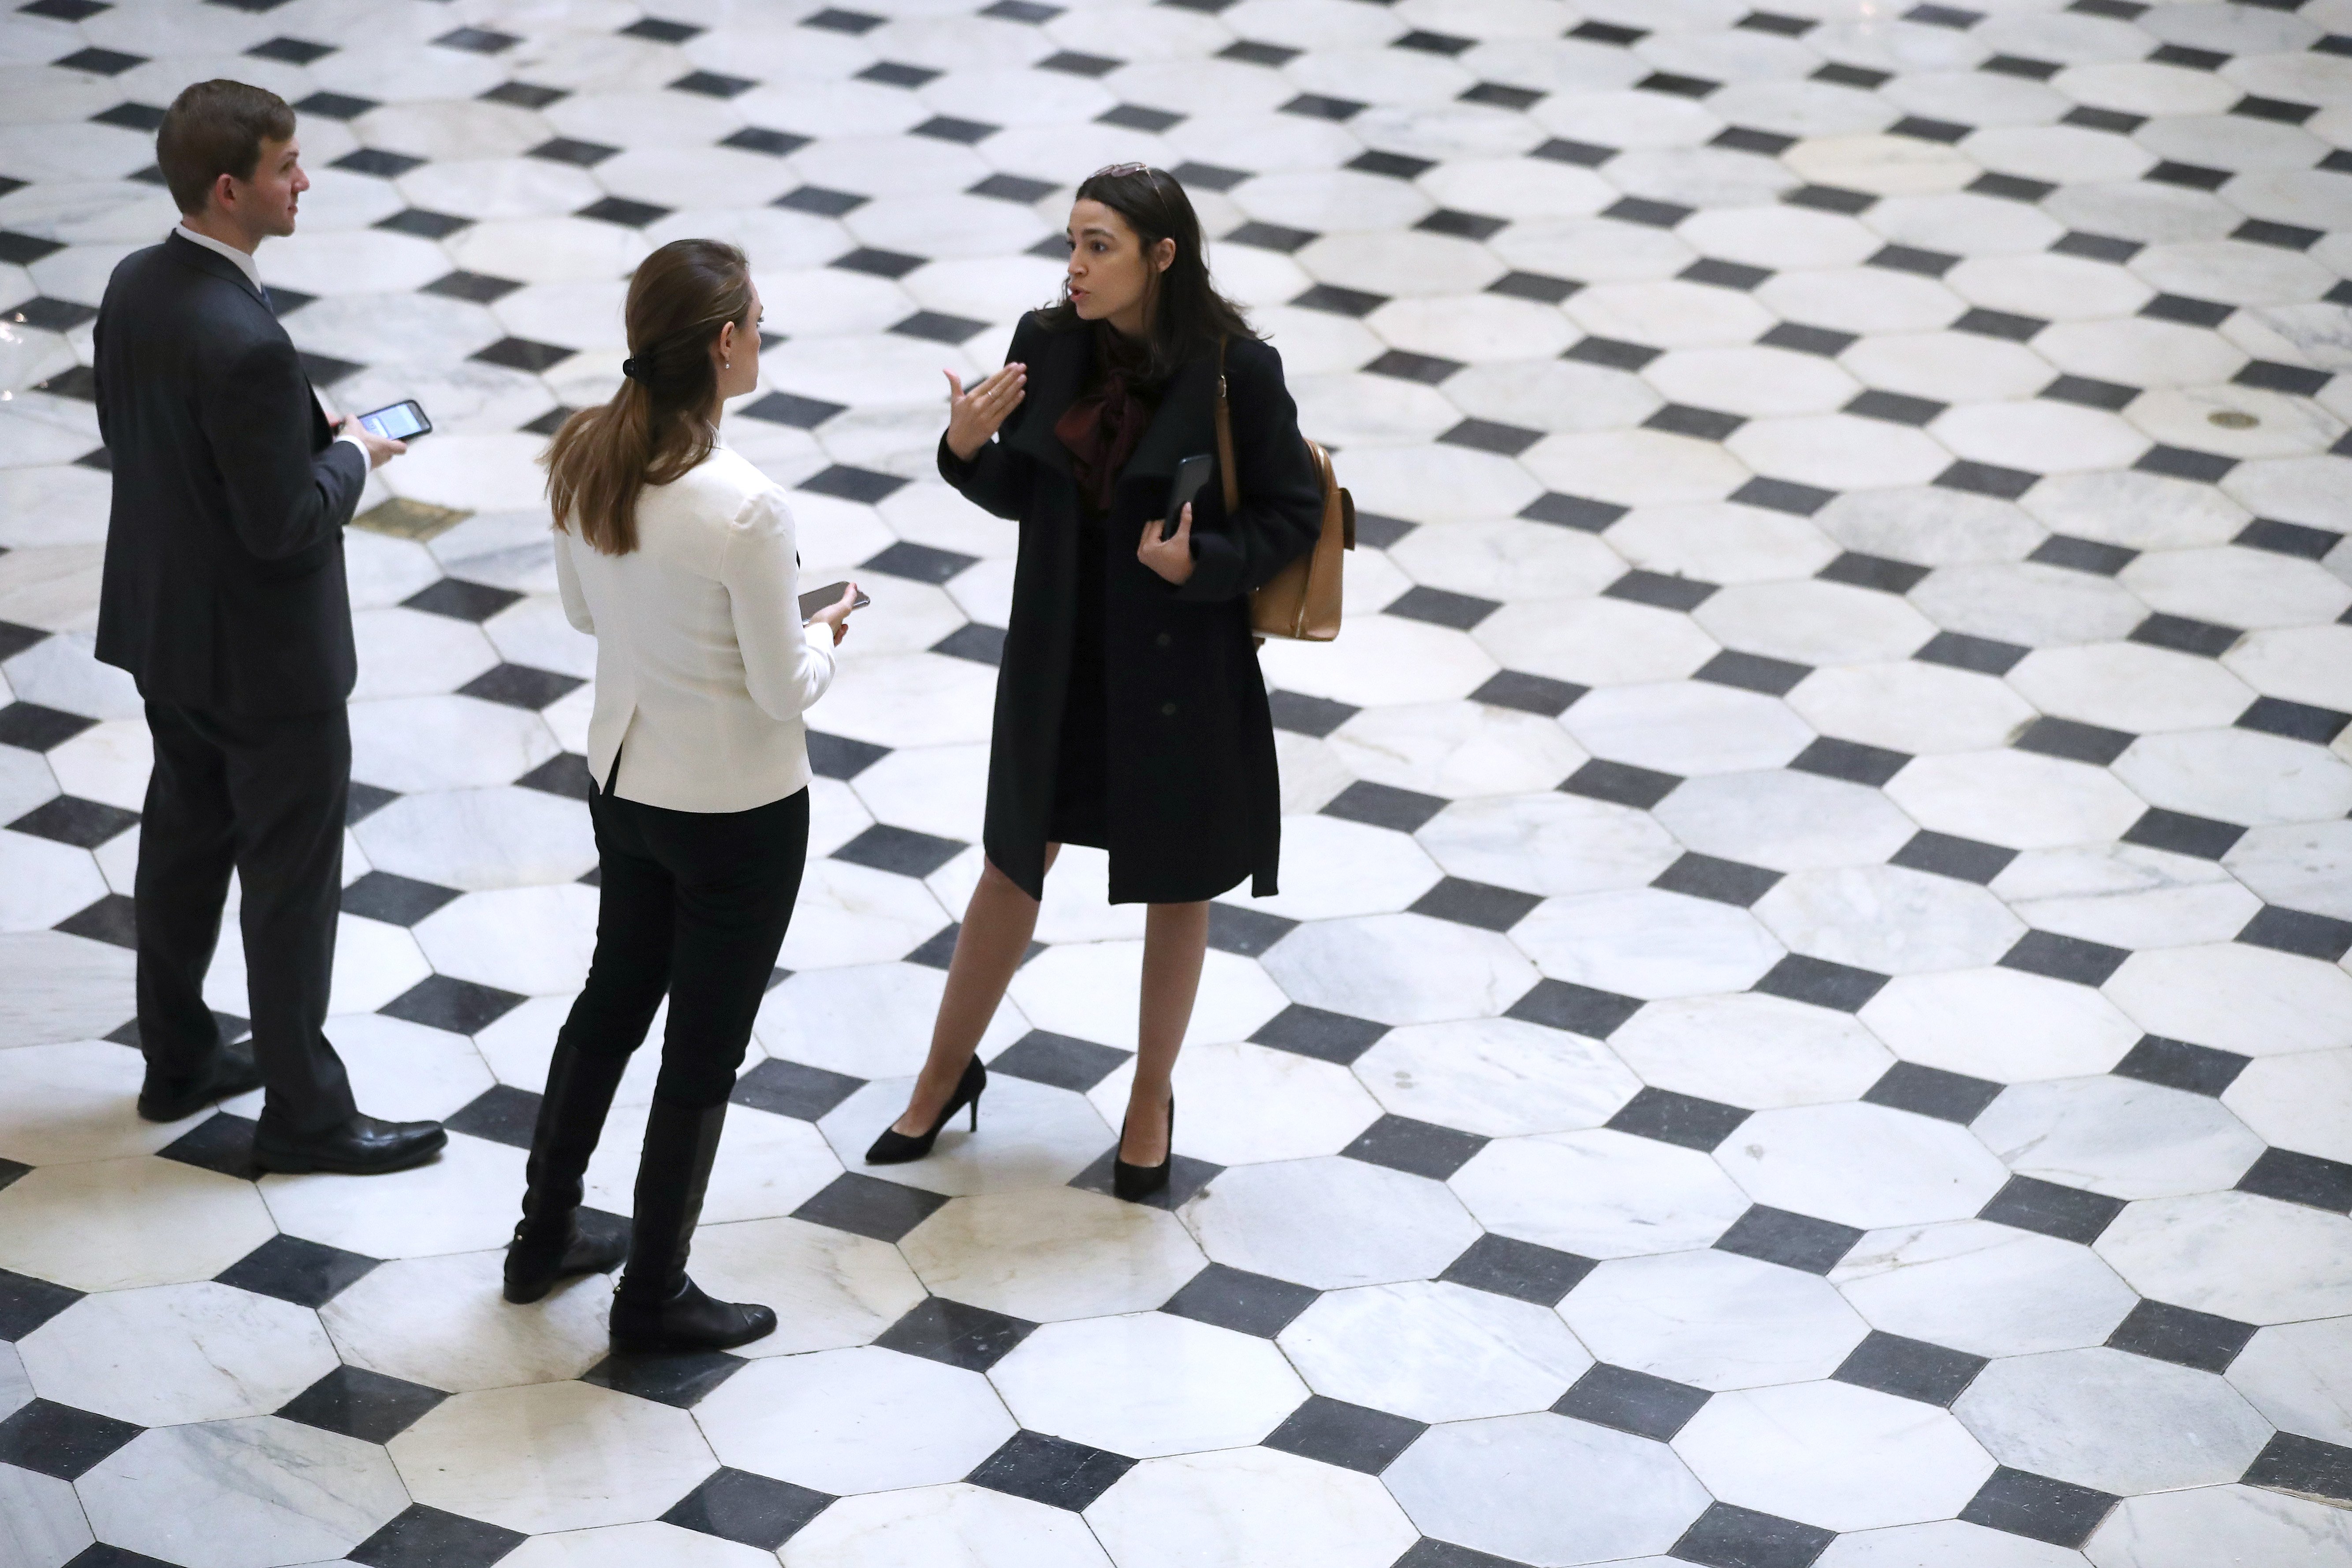 Rep. Alexandria Ocasio-Cortez talks with reporters in Statuary Hall in between votes at the U.S. Capitol December 18, 2019 in Washington, DC. (Chip Somodevilla/Getty Images)